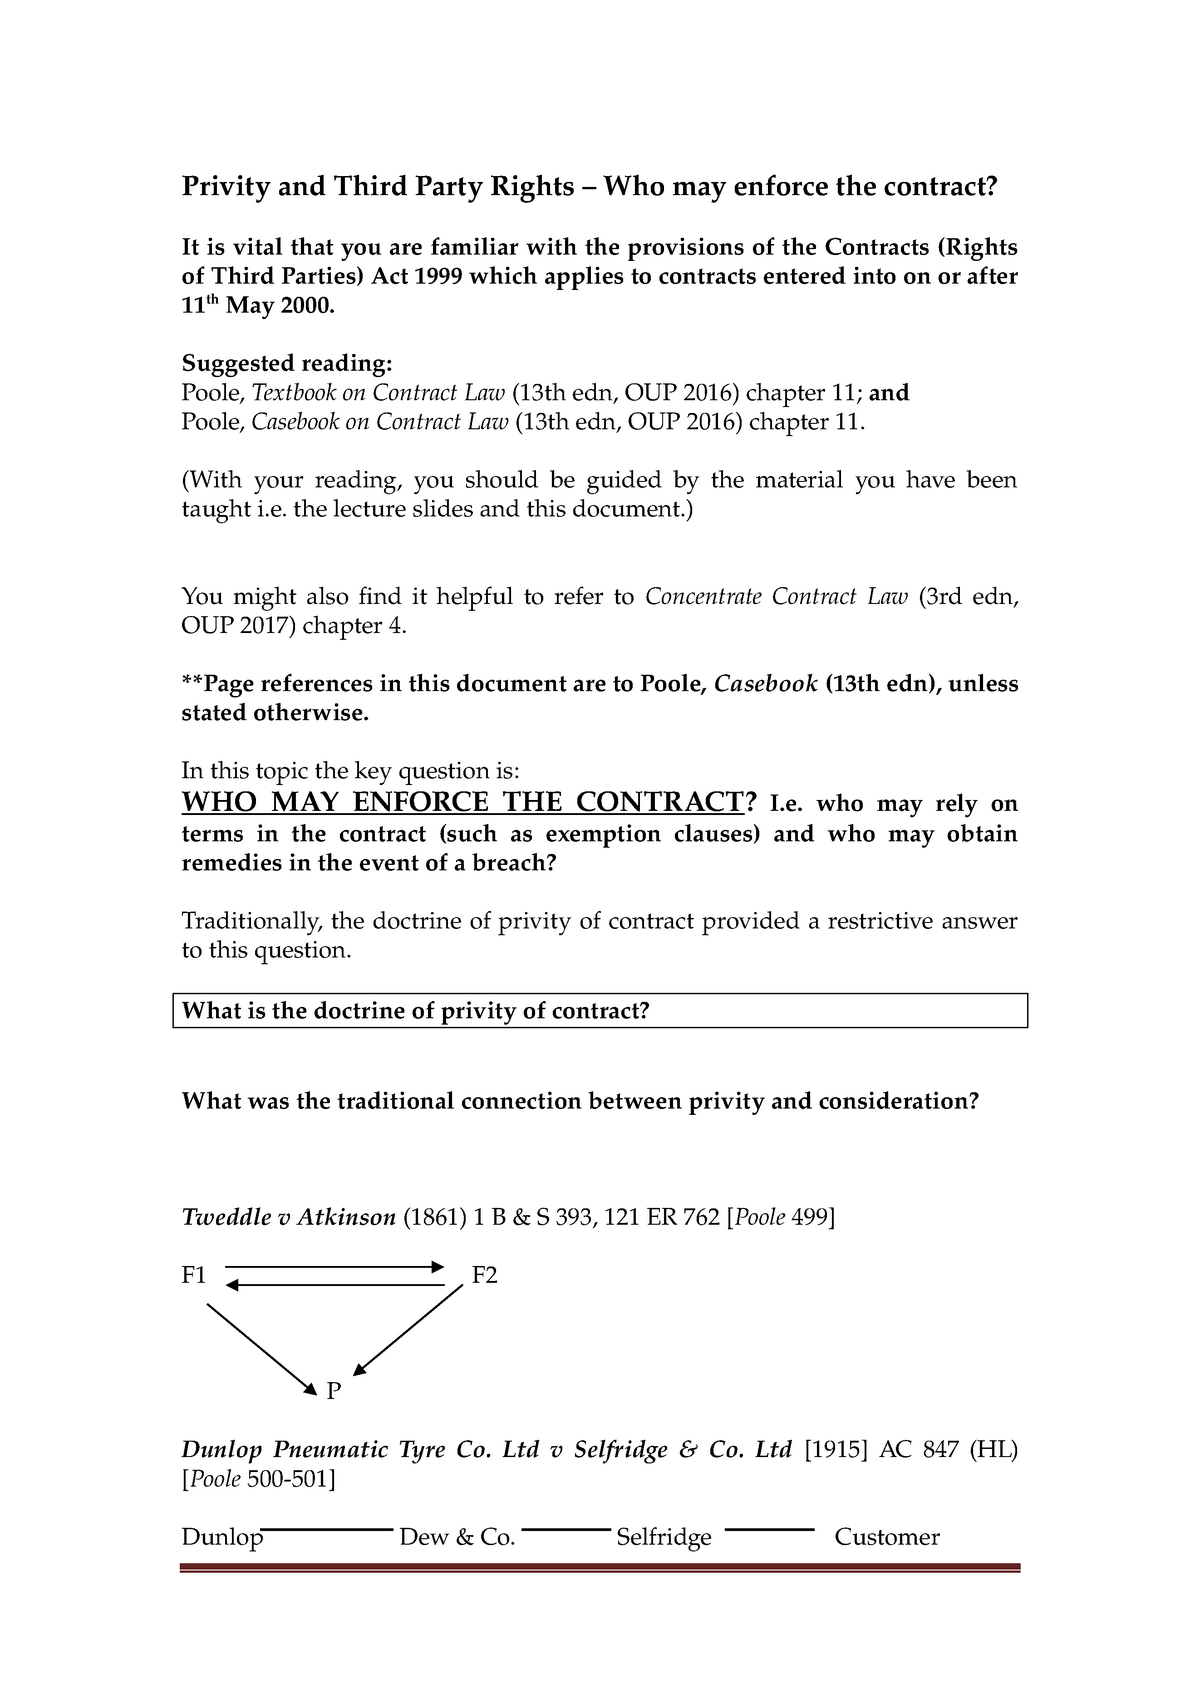 assignment worksheet 12.5 third party rights